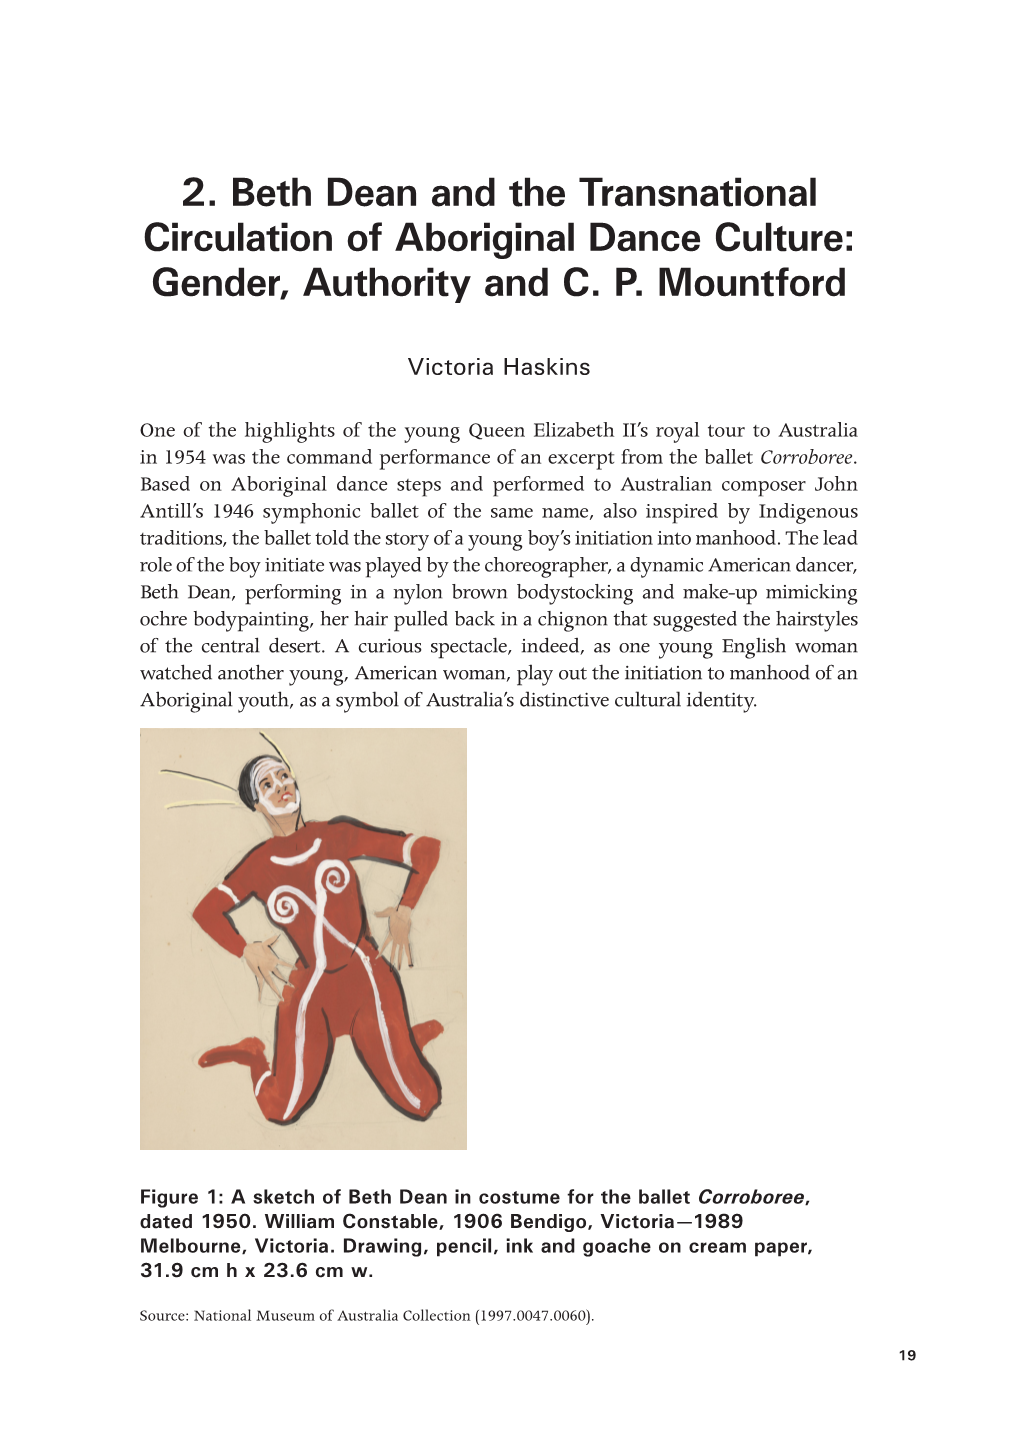 2. Beth Dean and the Transnational Circulation of Aboriginal Dance Culture: Gender, Authority and C